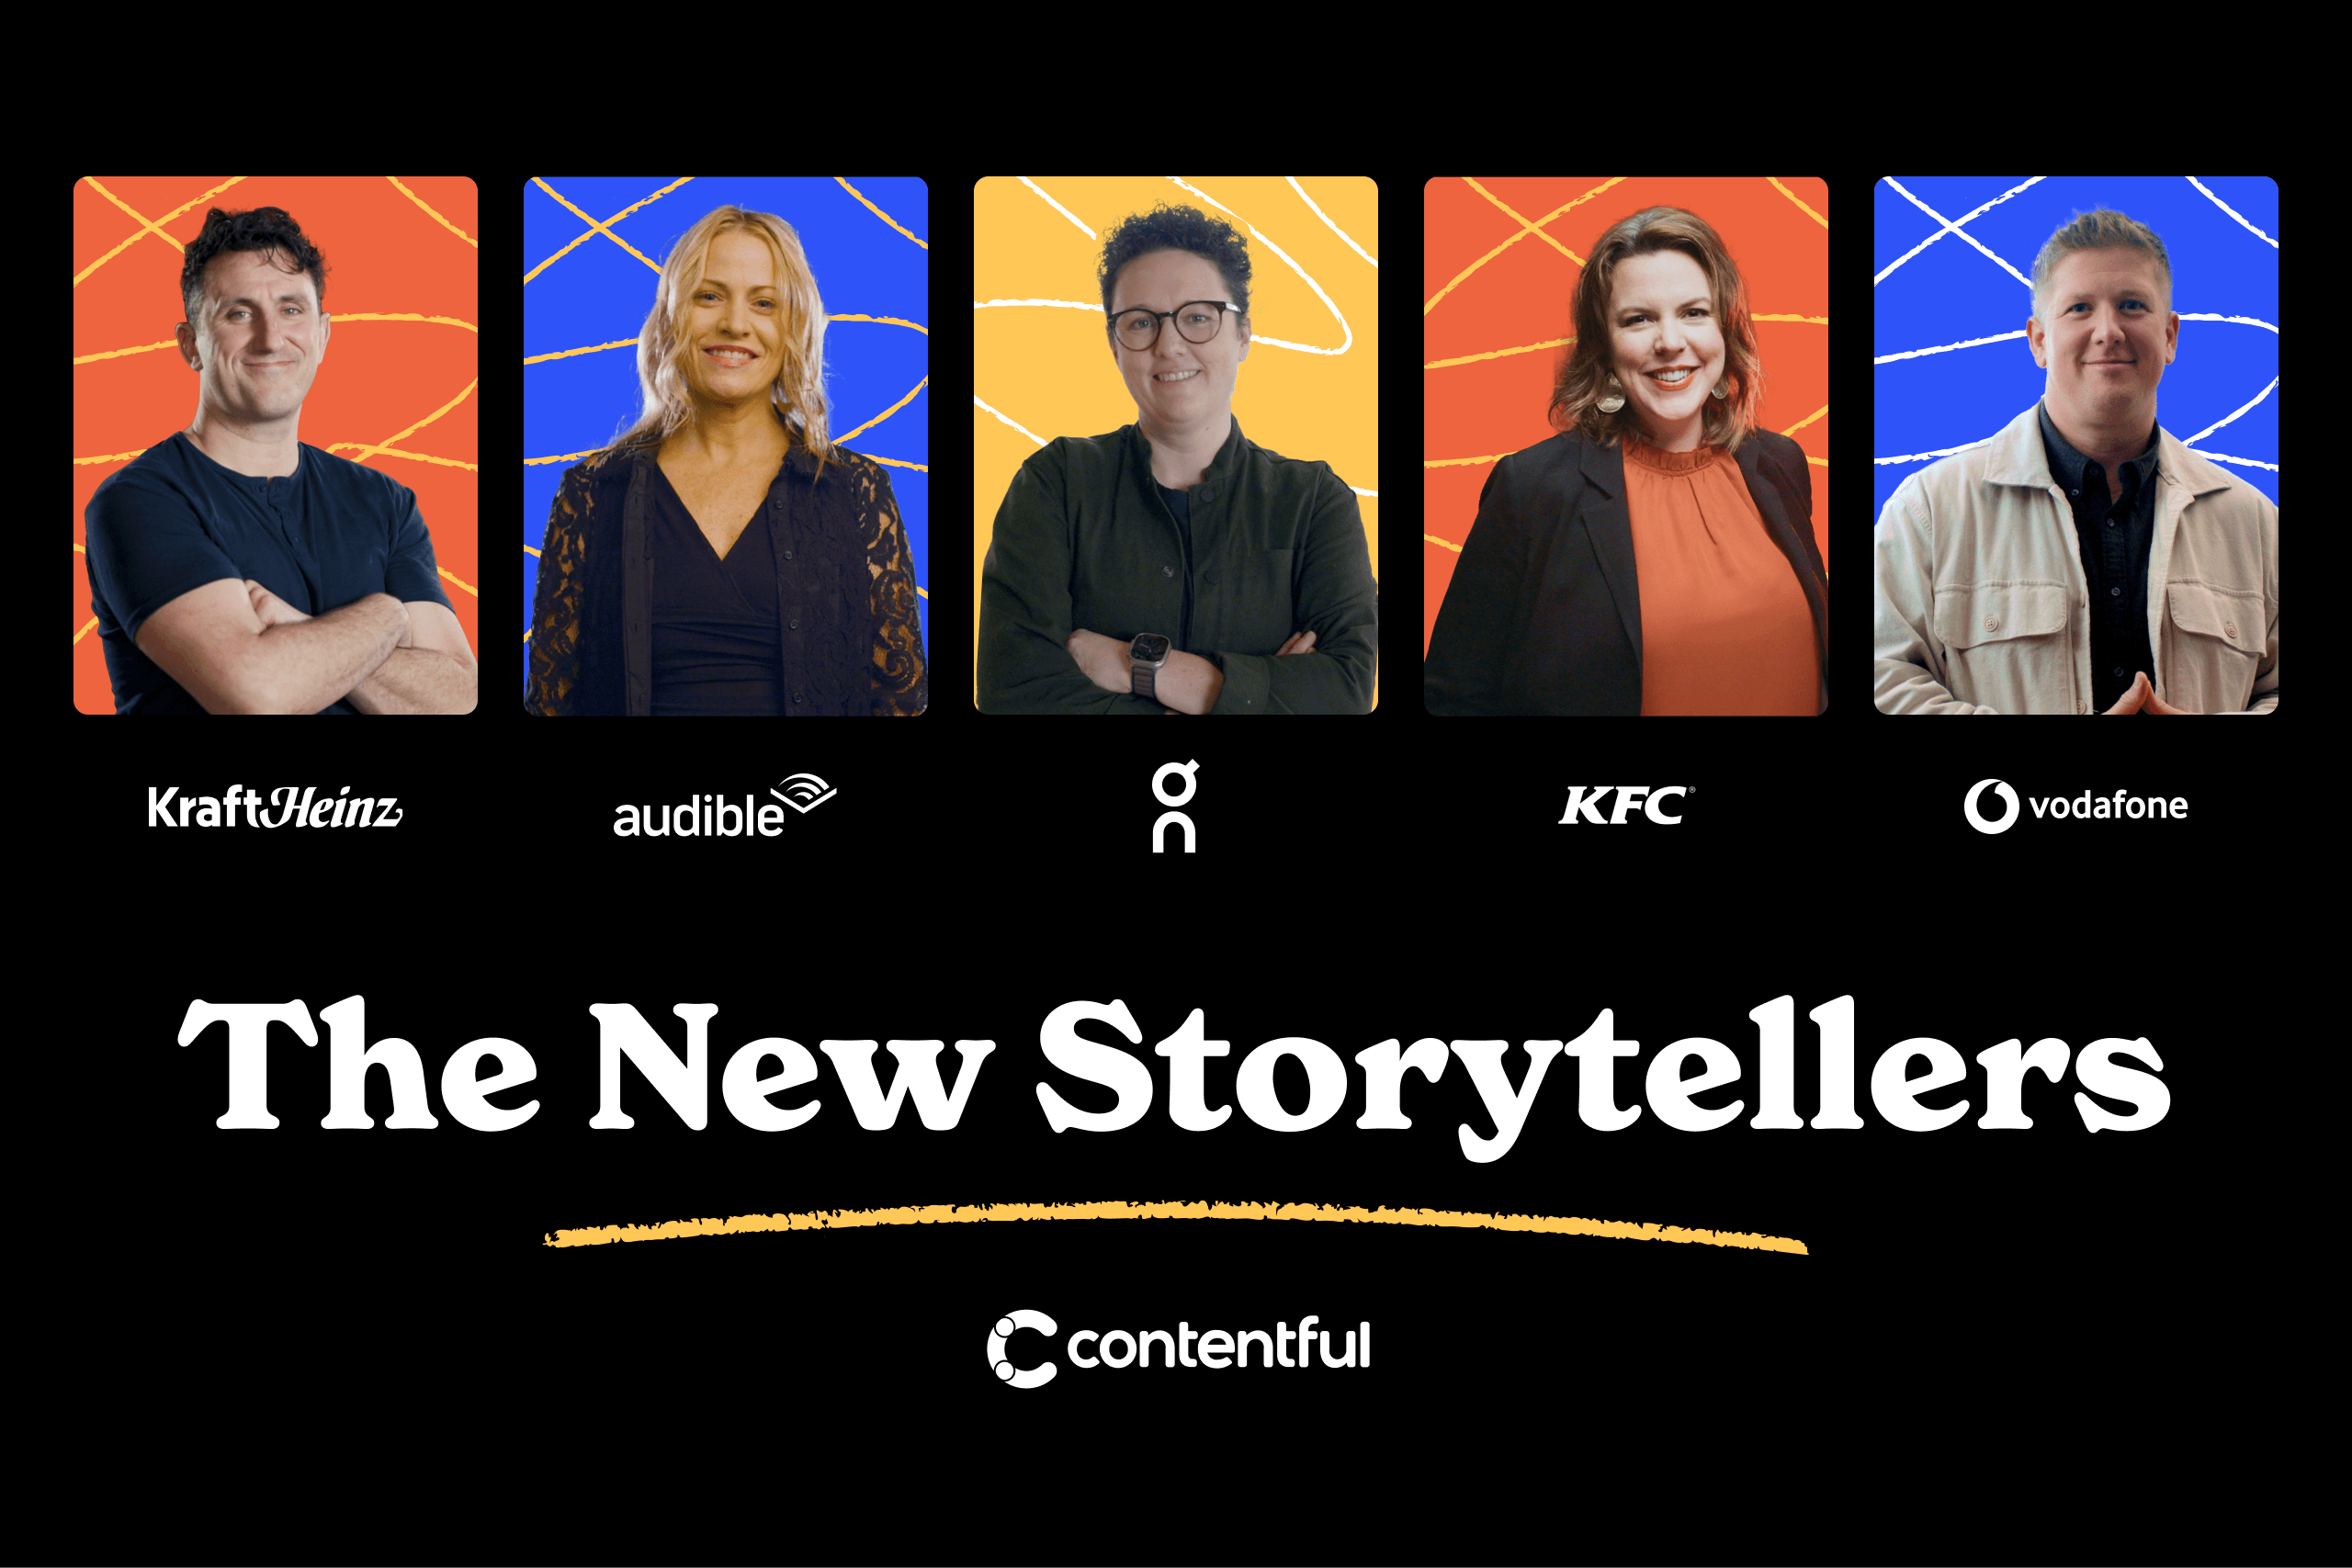 Promo for The New Storytellers series, highlighting the customer champion from each episode.